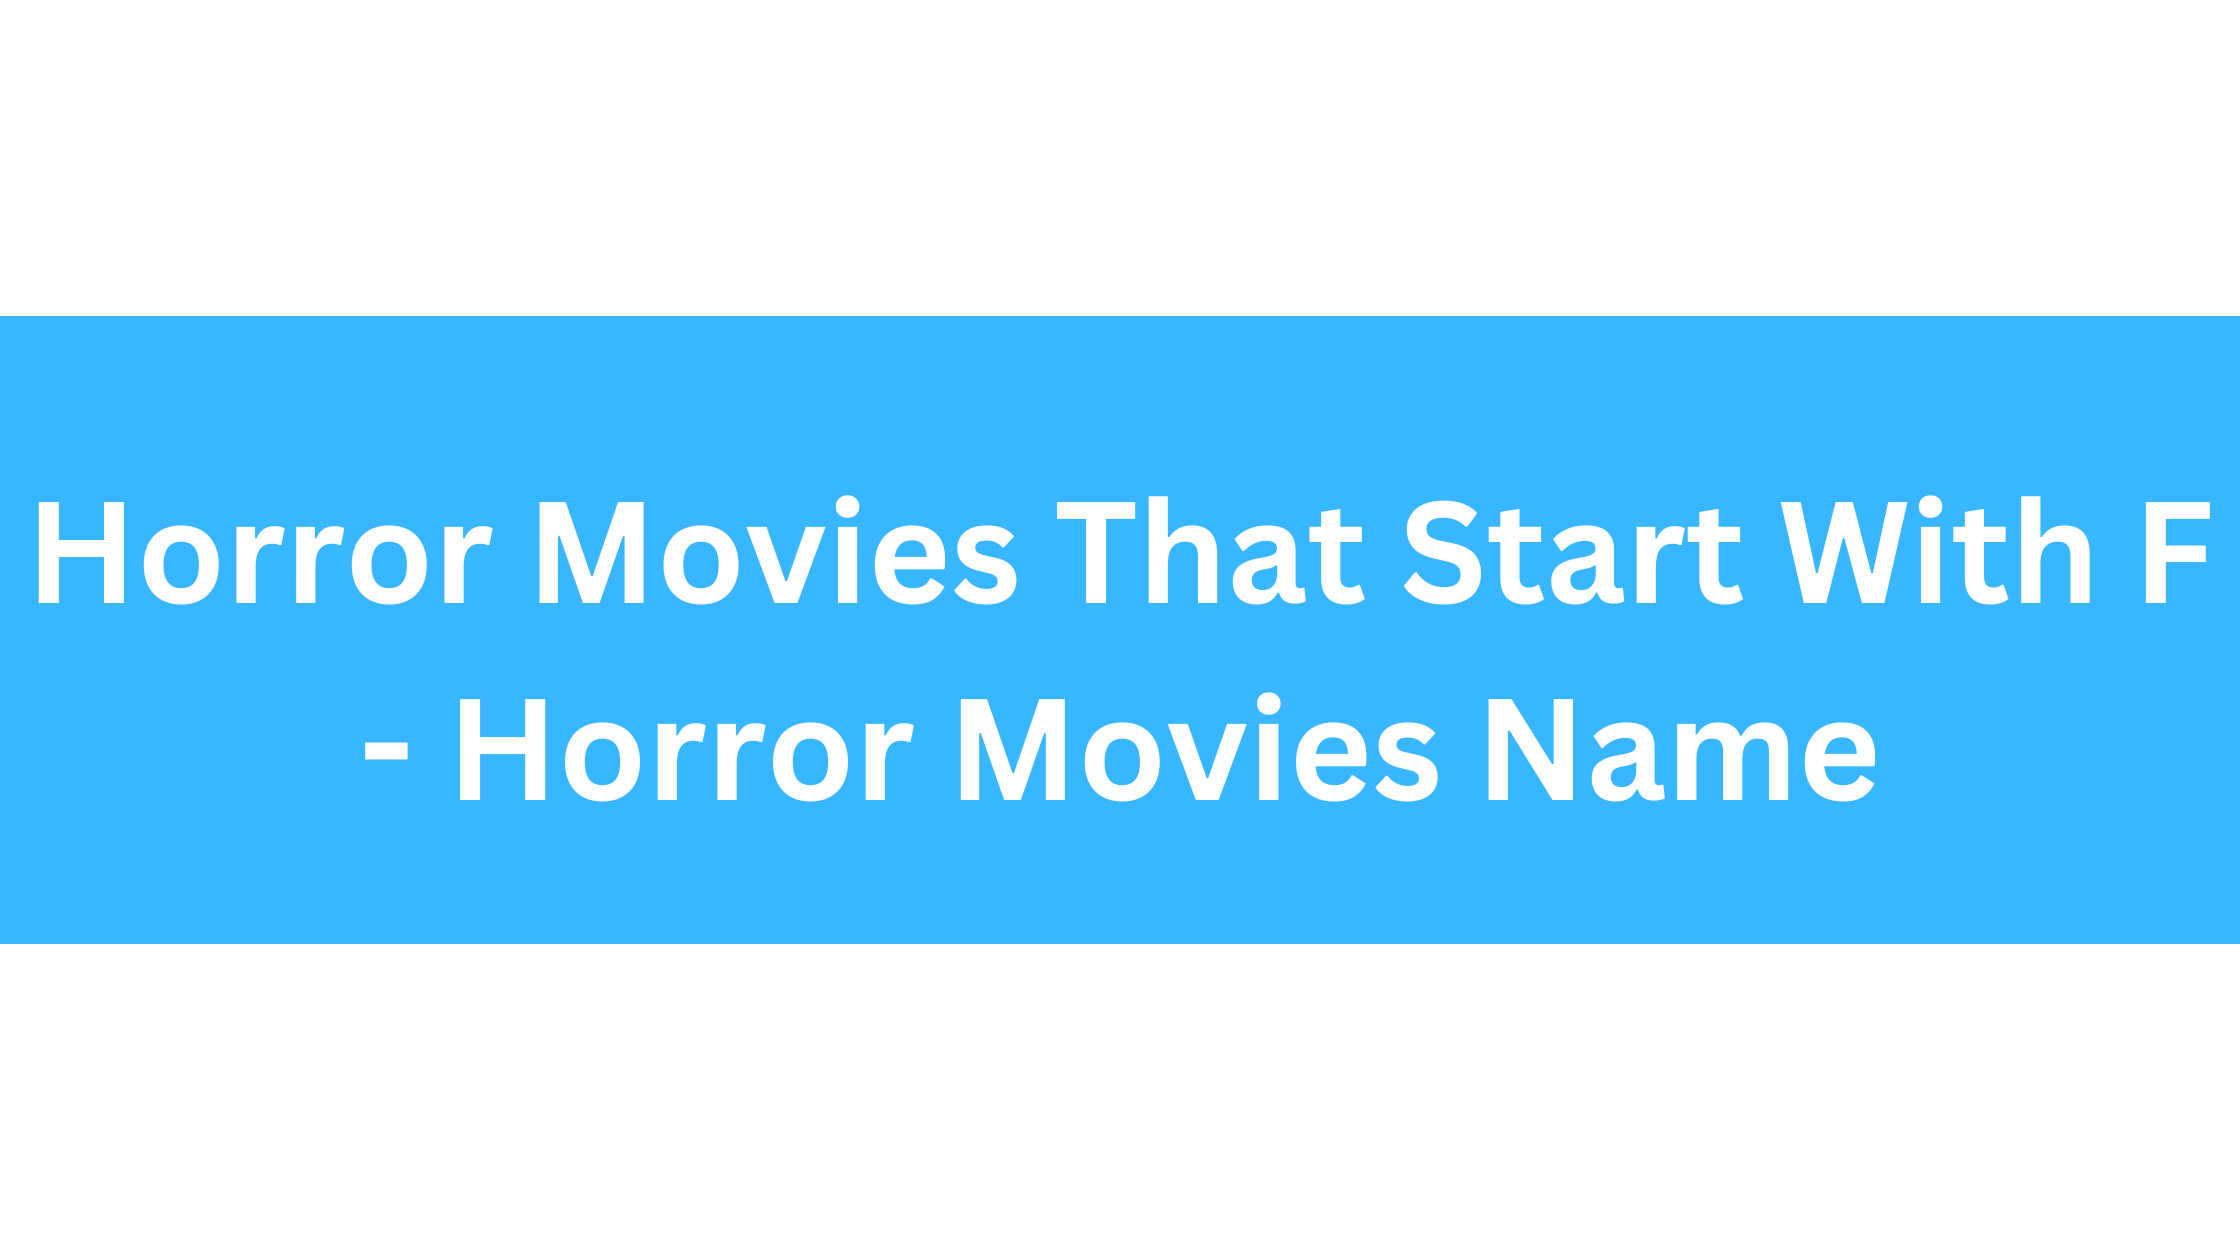 Horror Movies That Start With F